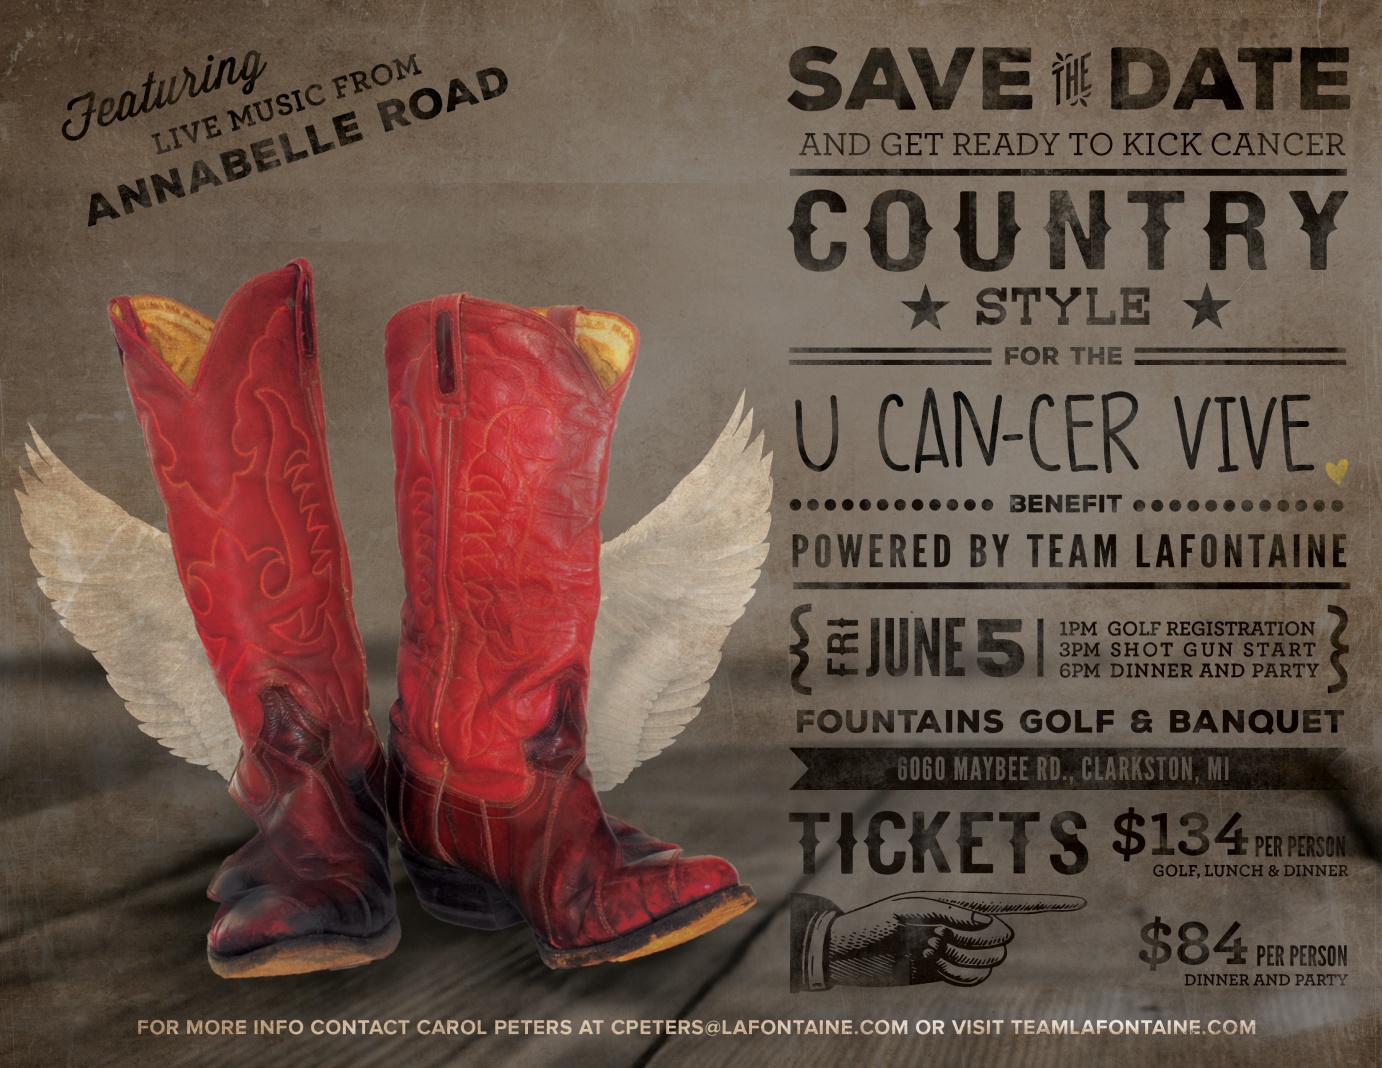 U Can-Cer Vive benefiting Angels of Hope